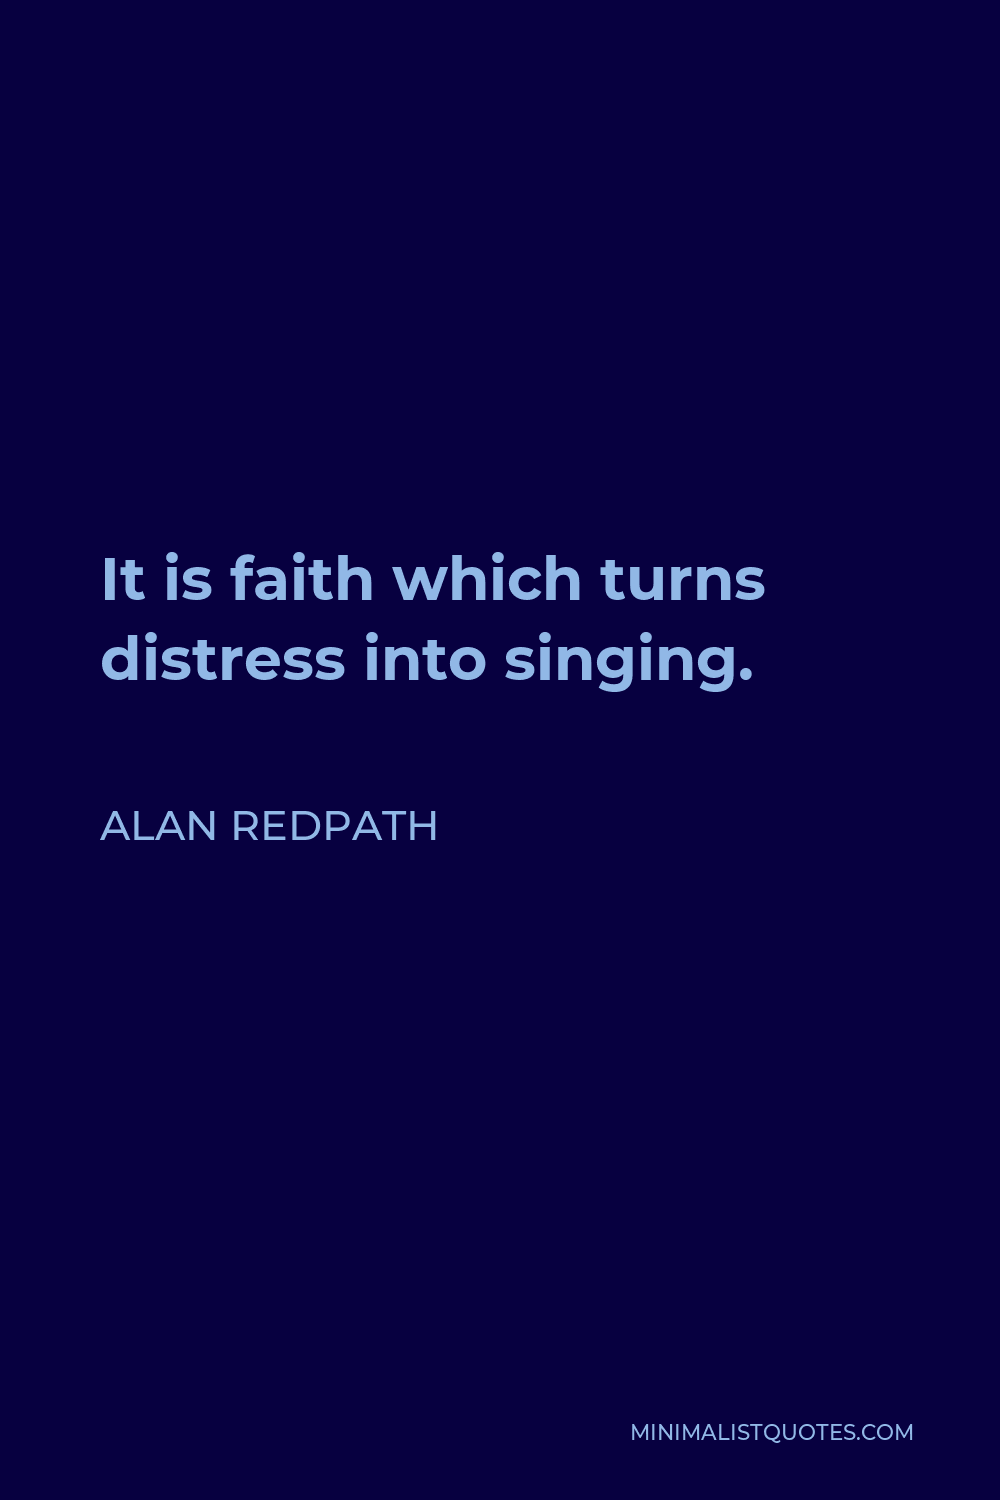 Alan Redpath Quote - It is faith which turns distress into singing.